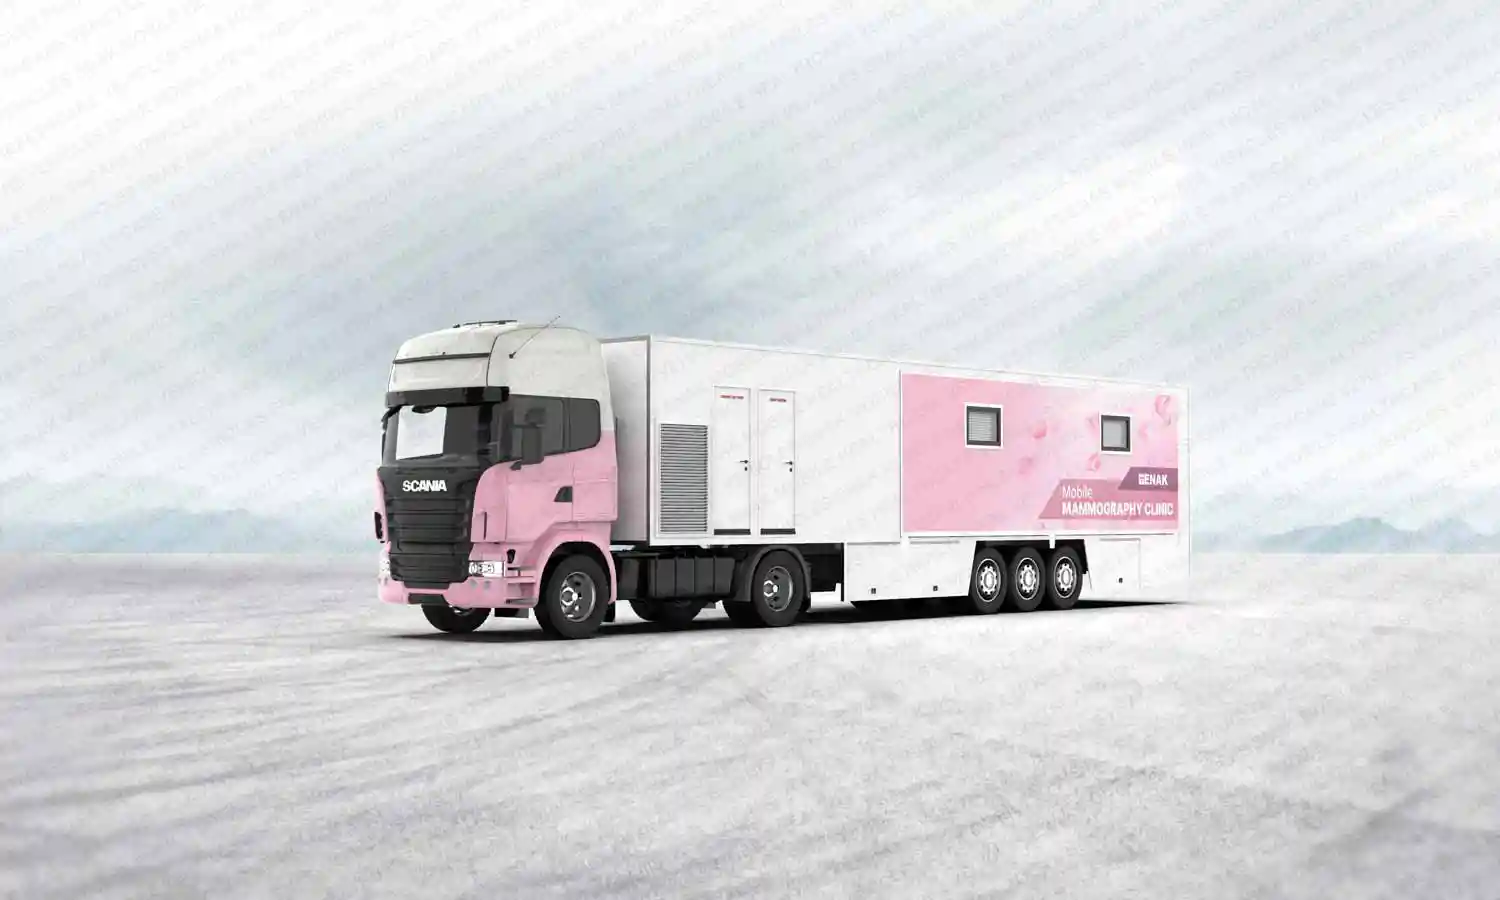 Mobile Mammography Clinic-Long Trailer